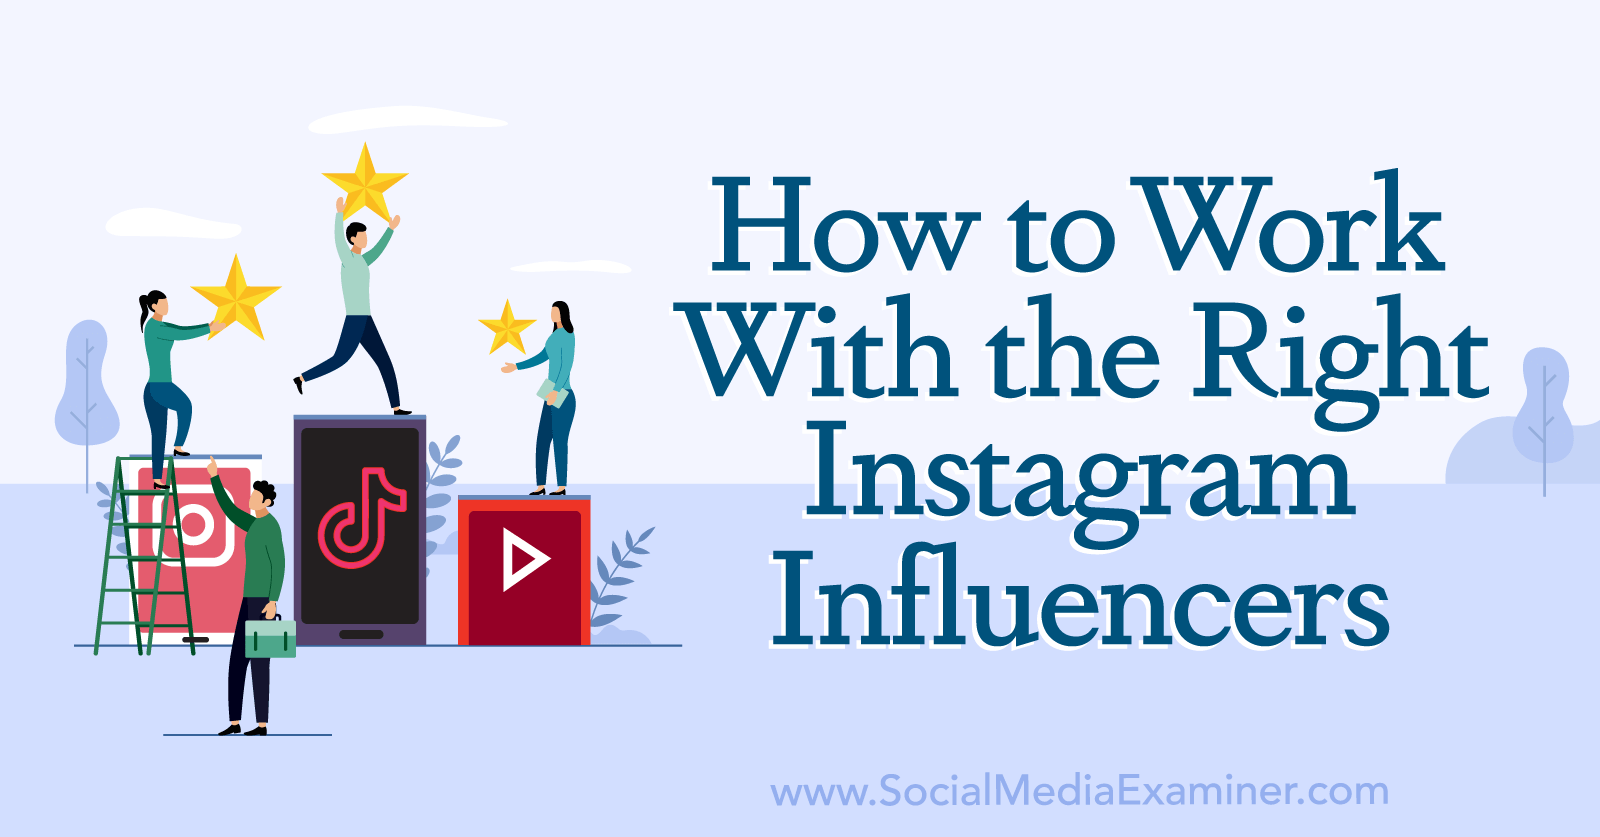 How to Work With the Right Instagram Influencers-Social Media Examiner